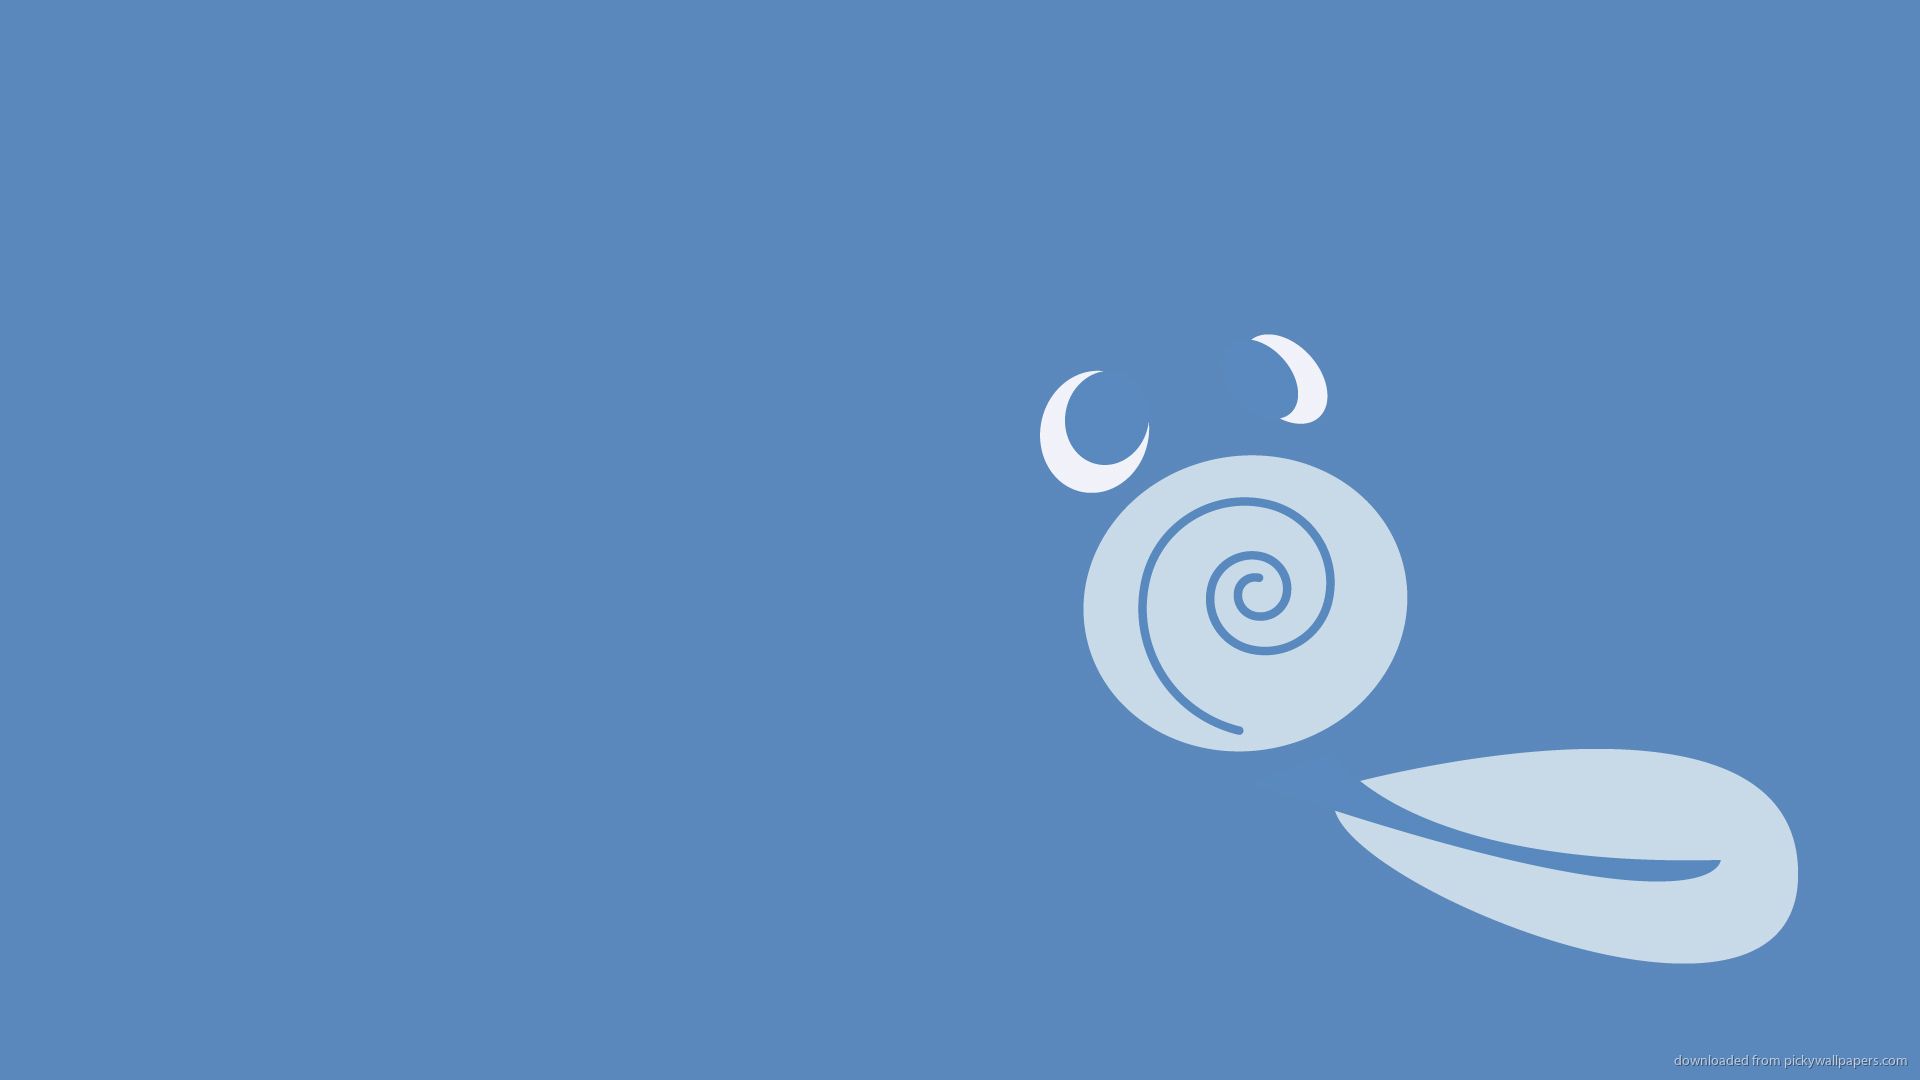 Simple Poliwag Pokemon Wallpaper Picture For iPhone, Blackberry